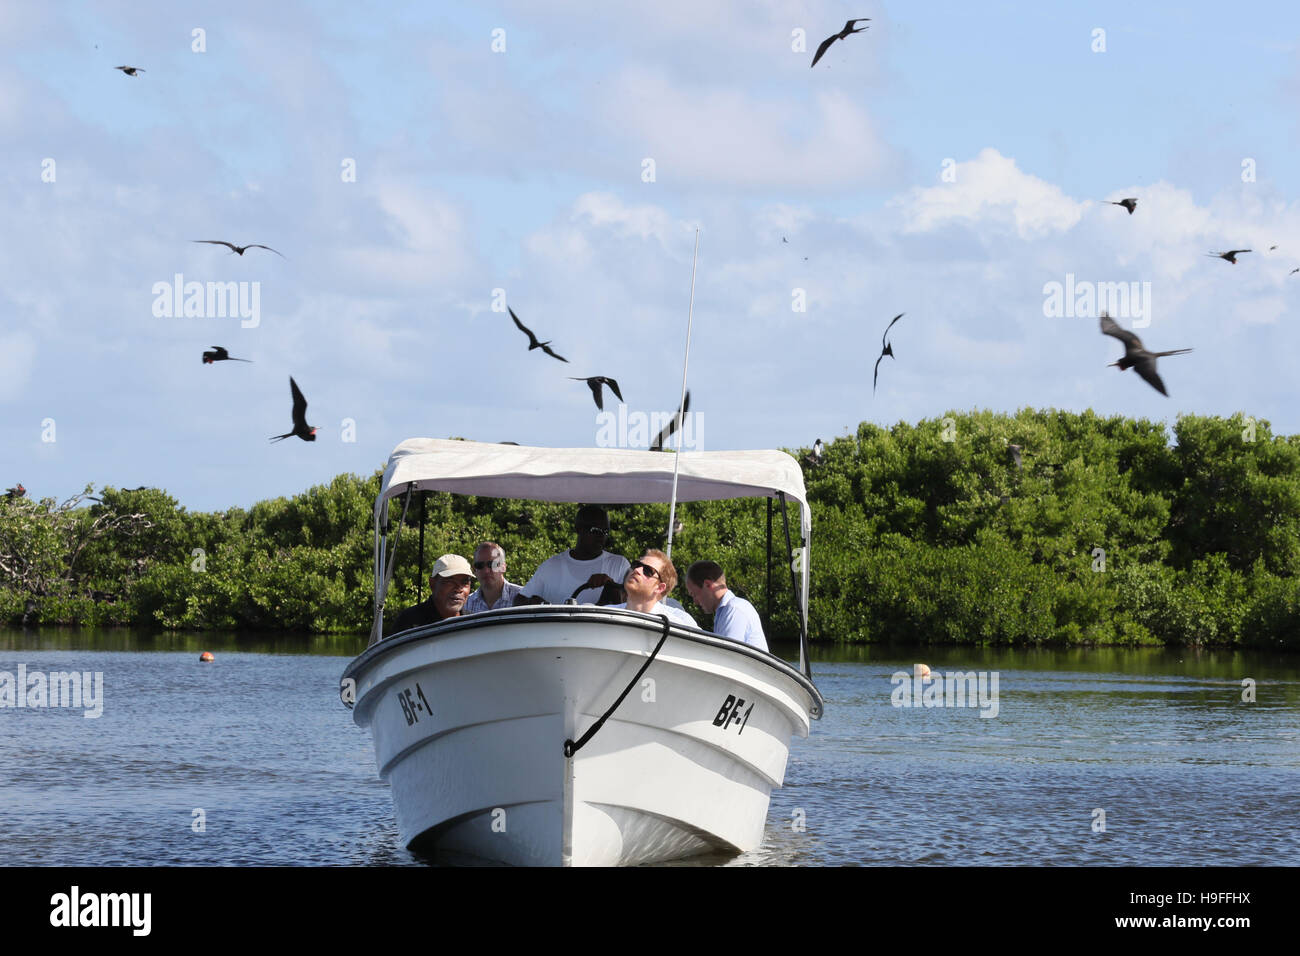 Prince Harry takes a boat tour through mangroves on the island of Barbuda to see one of the largest colonies of frigate birds in the world, as he continues his tour of the Caribbean. Stock Photo